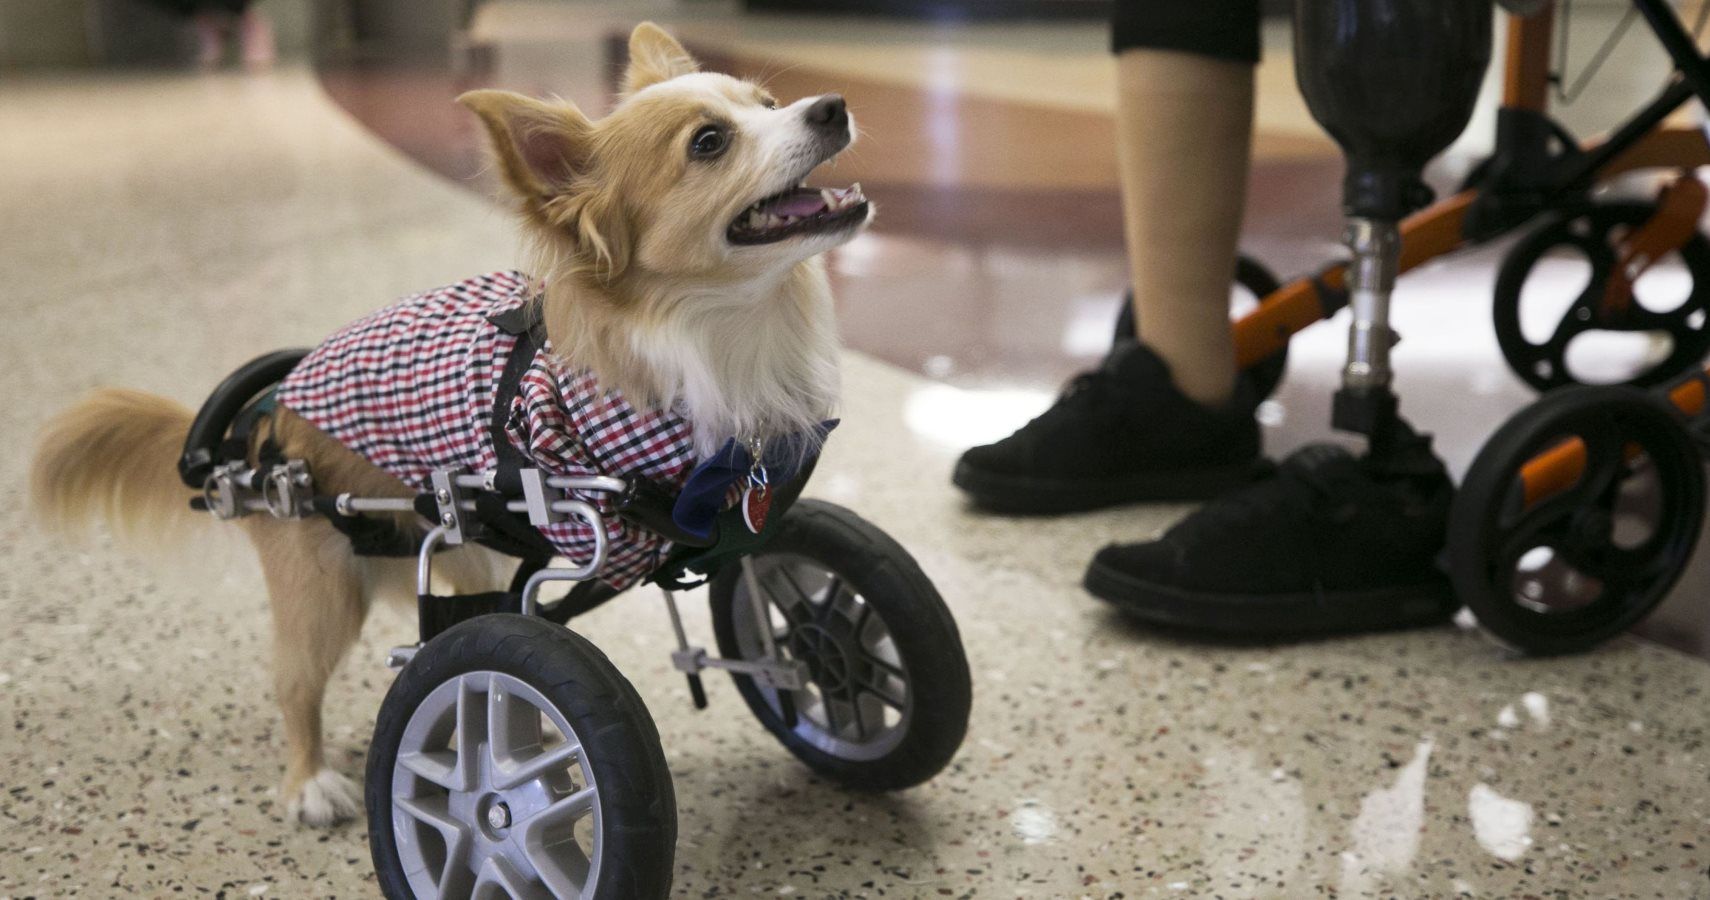 This Therapy Dog May Be Missing His Front Legs, But He Won't Let That Stop Him From Helping People